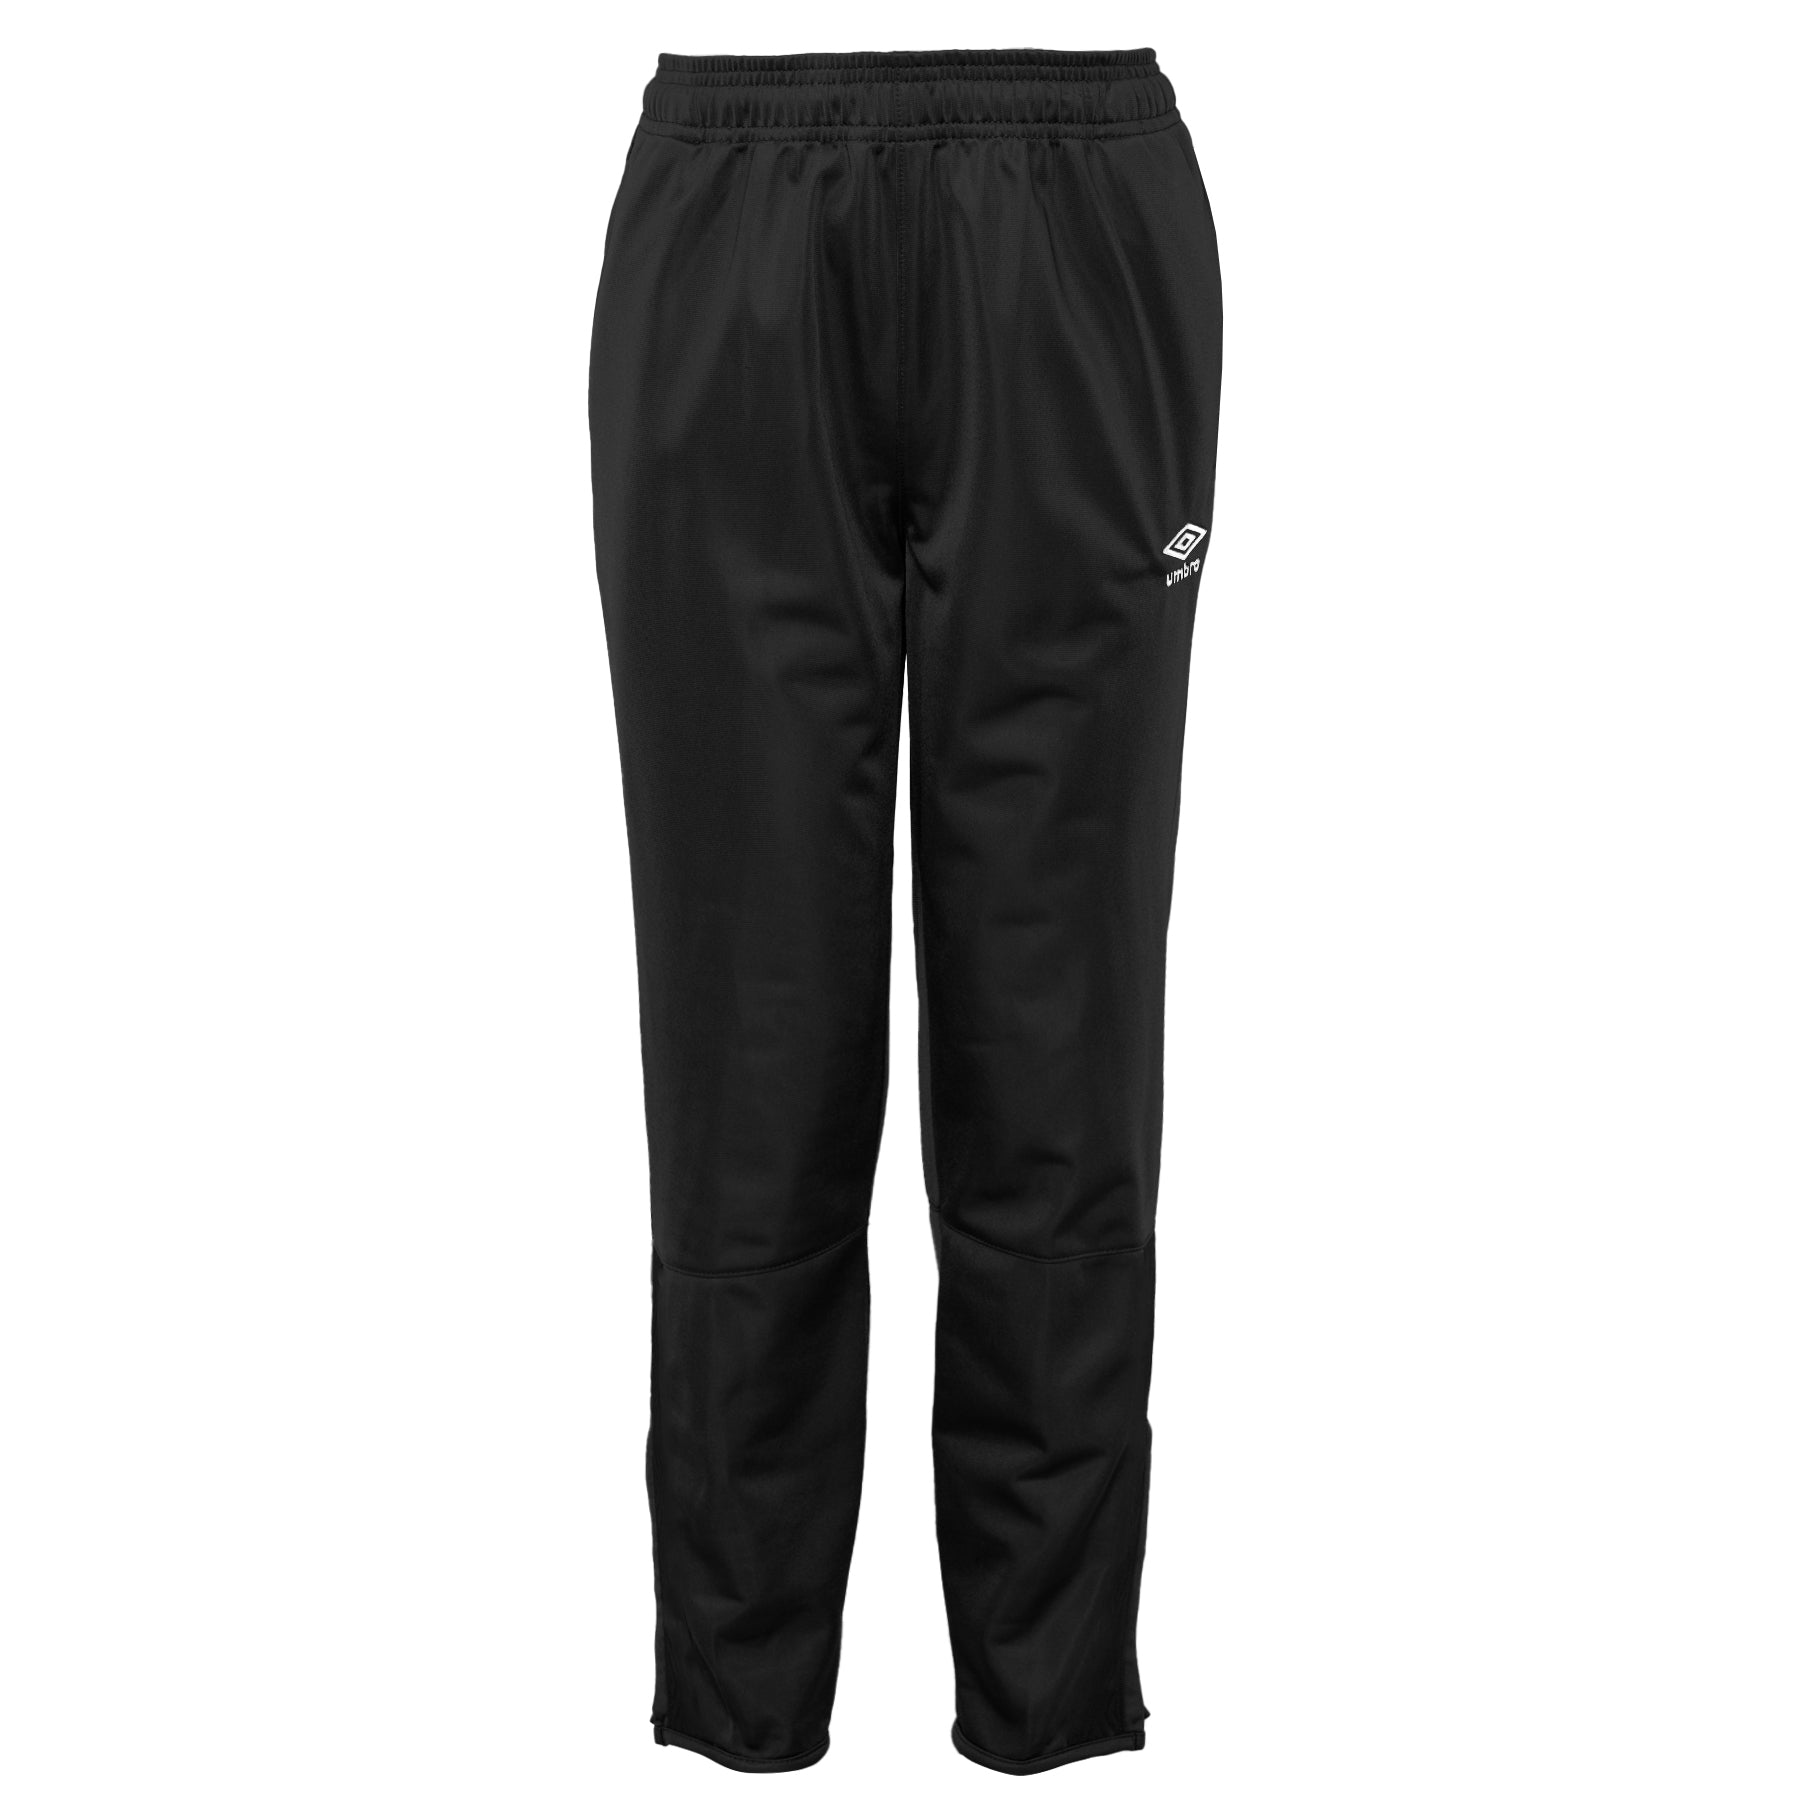 Regular Fit Mens Track Pant at Rs.649/Piece in vasai-virar offer by Badshah  Collection